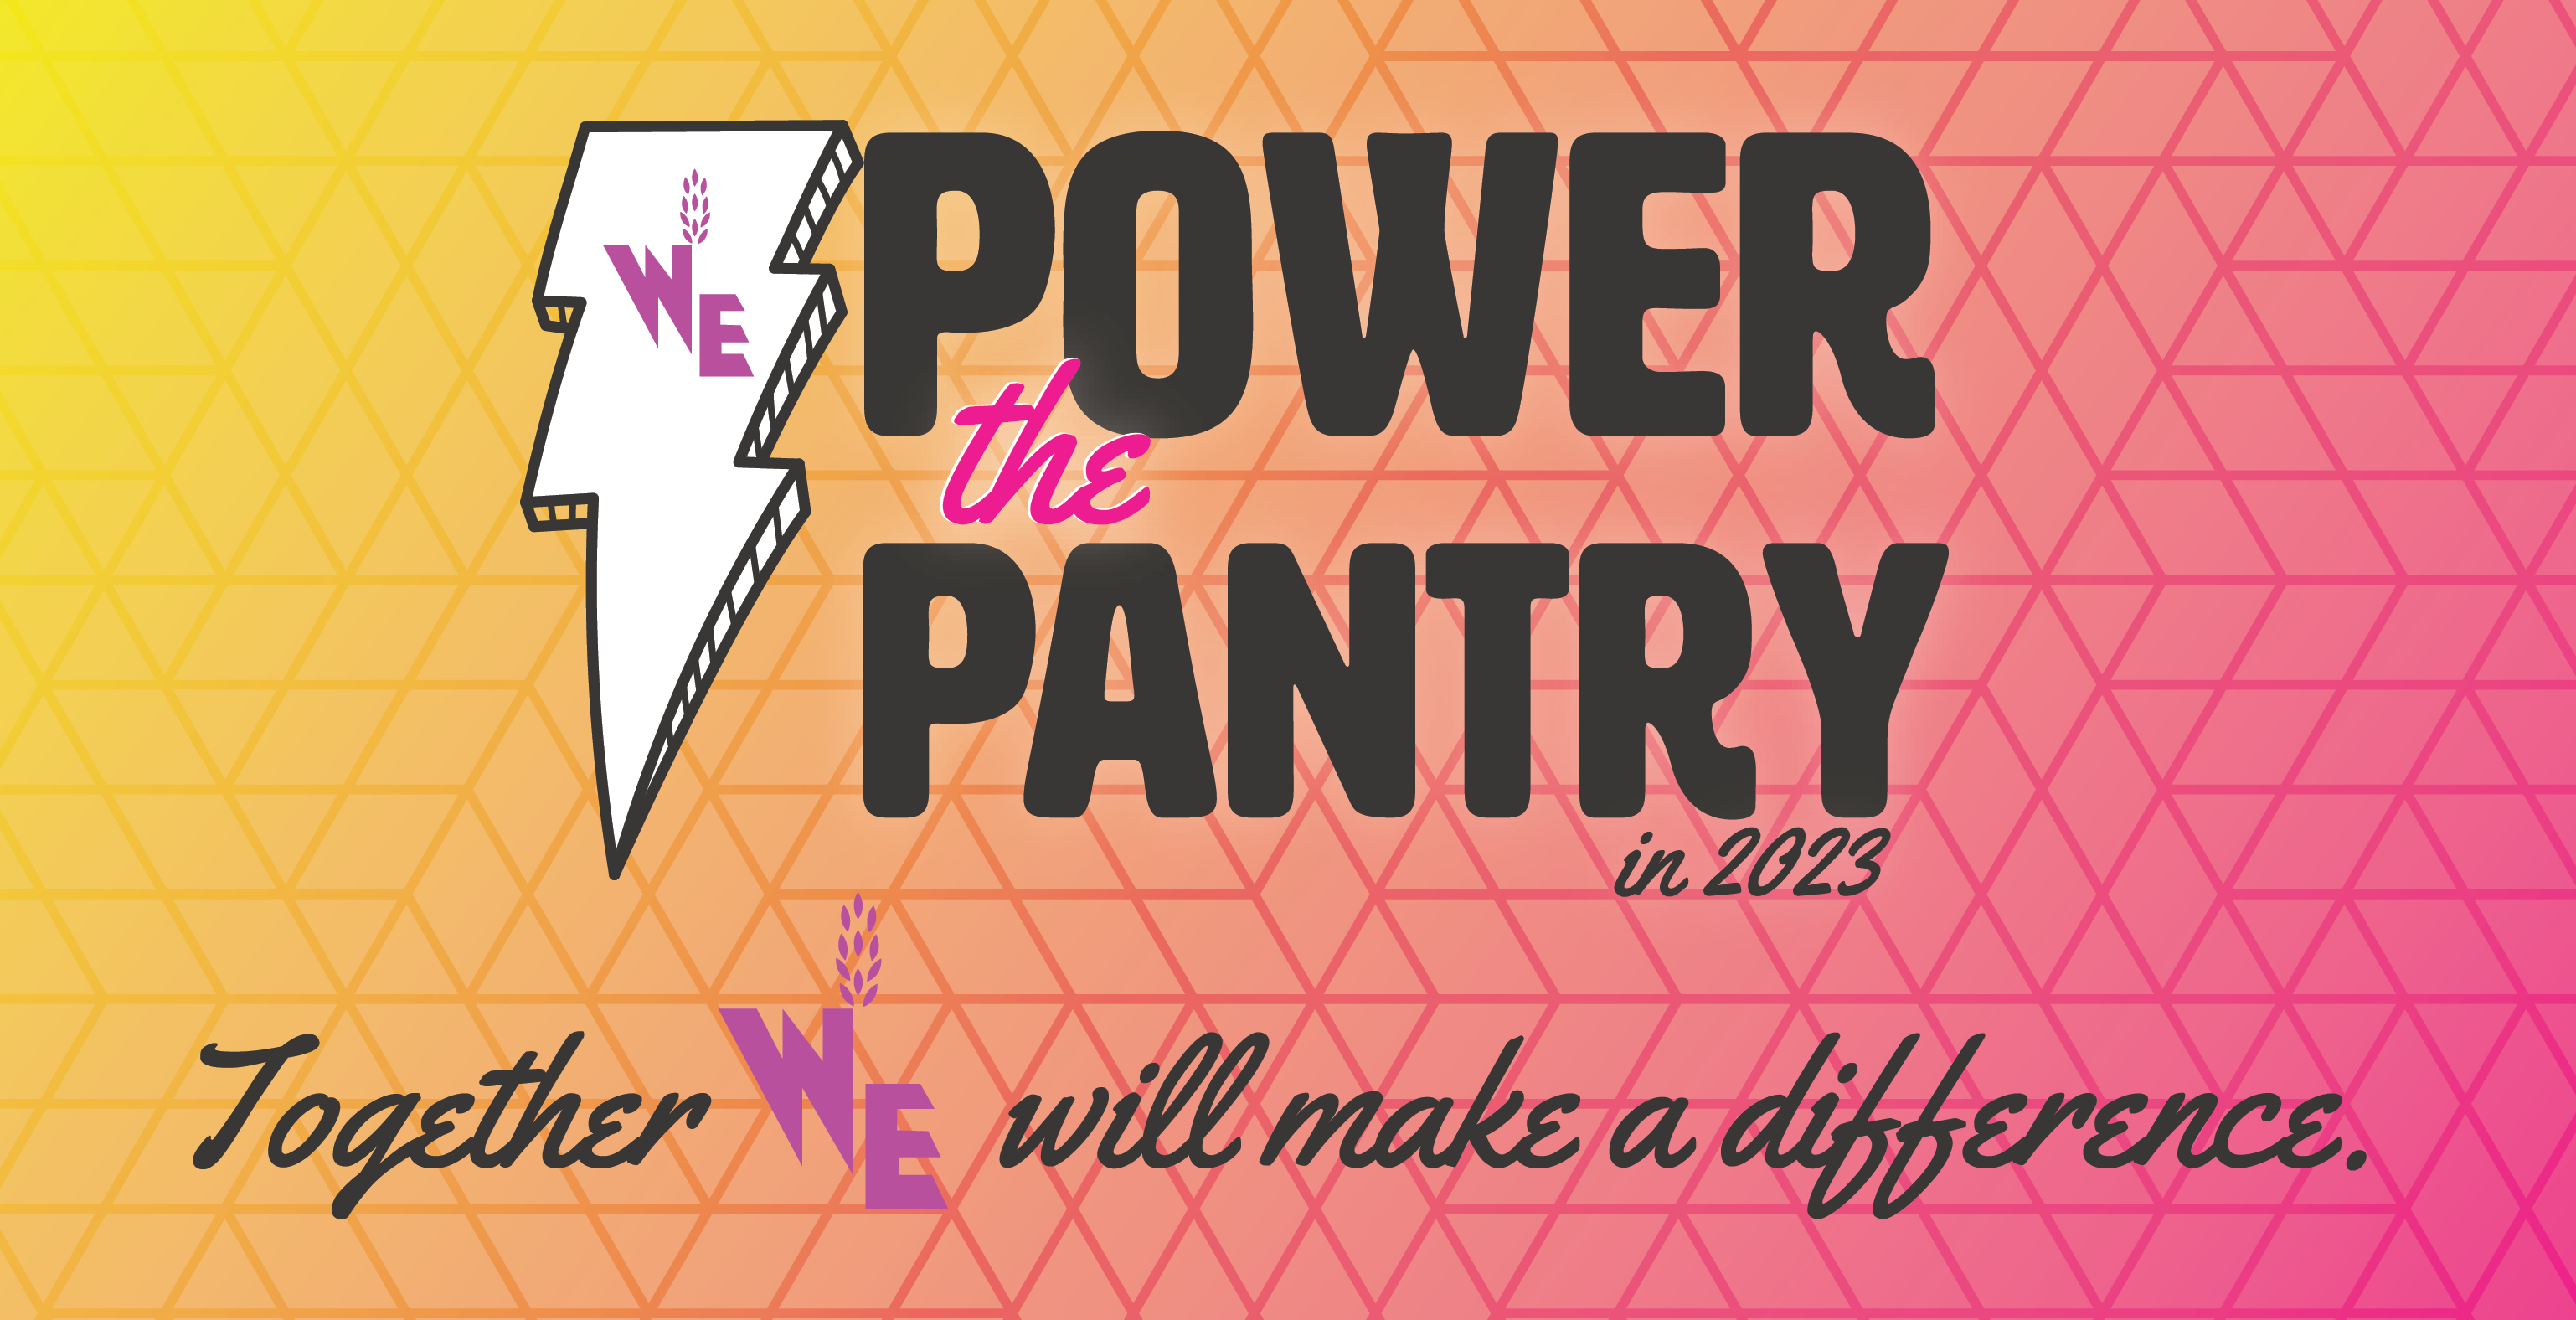 WE Power the Pantry in 2023!